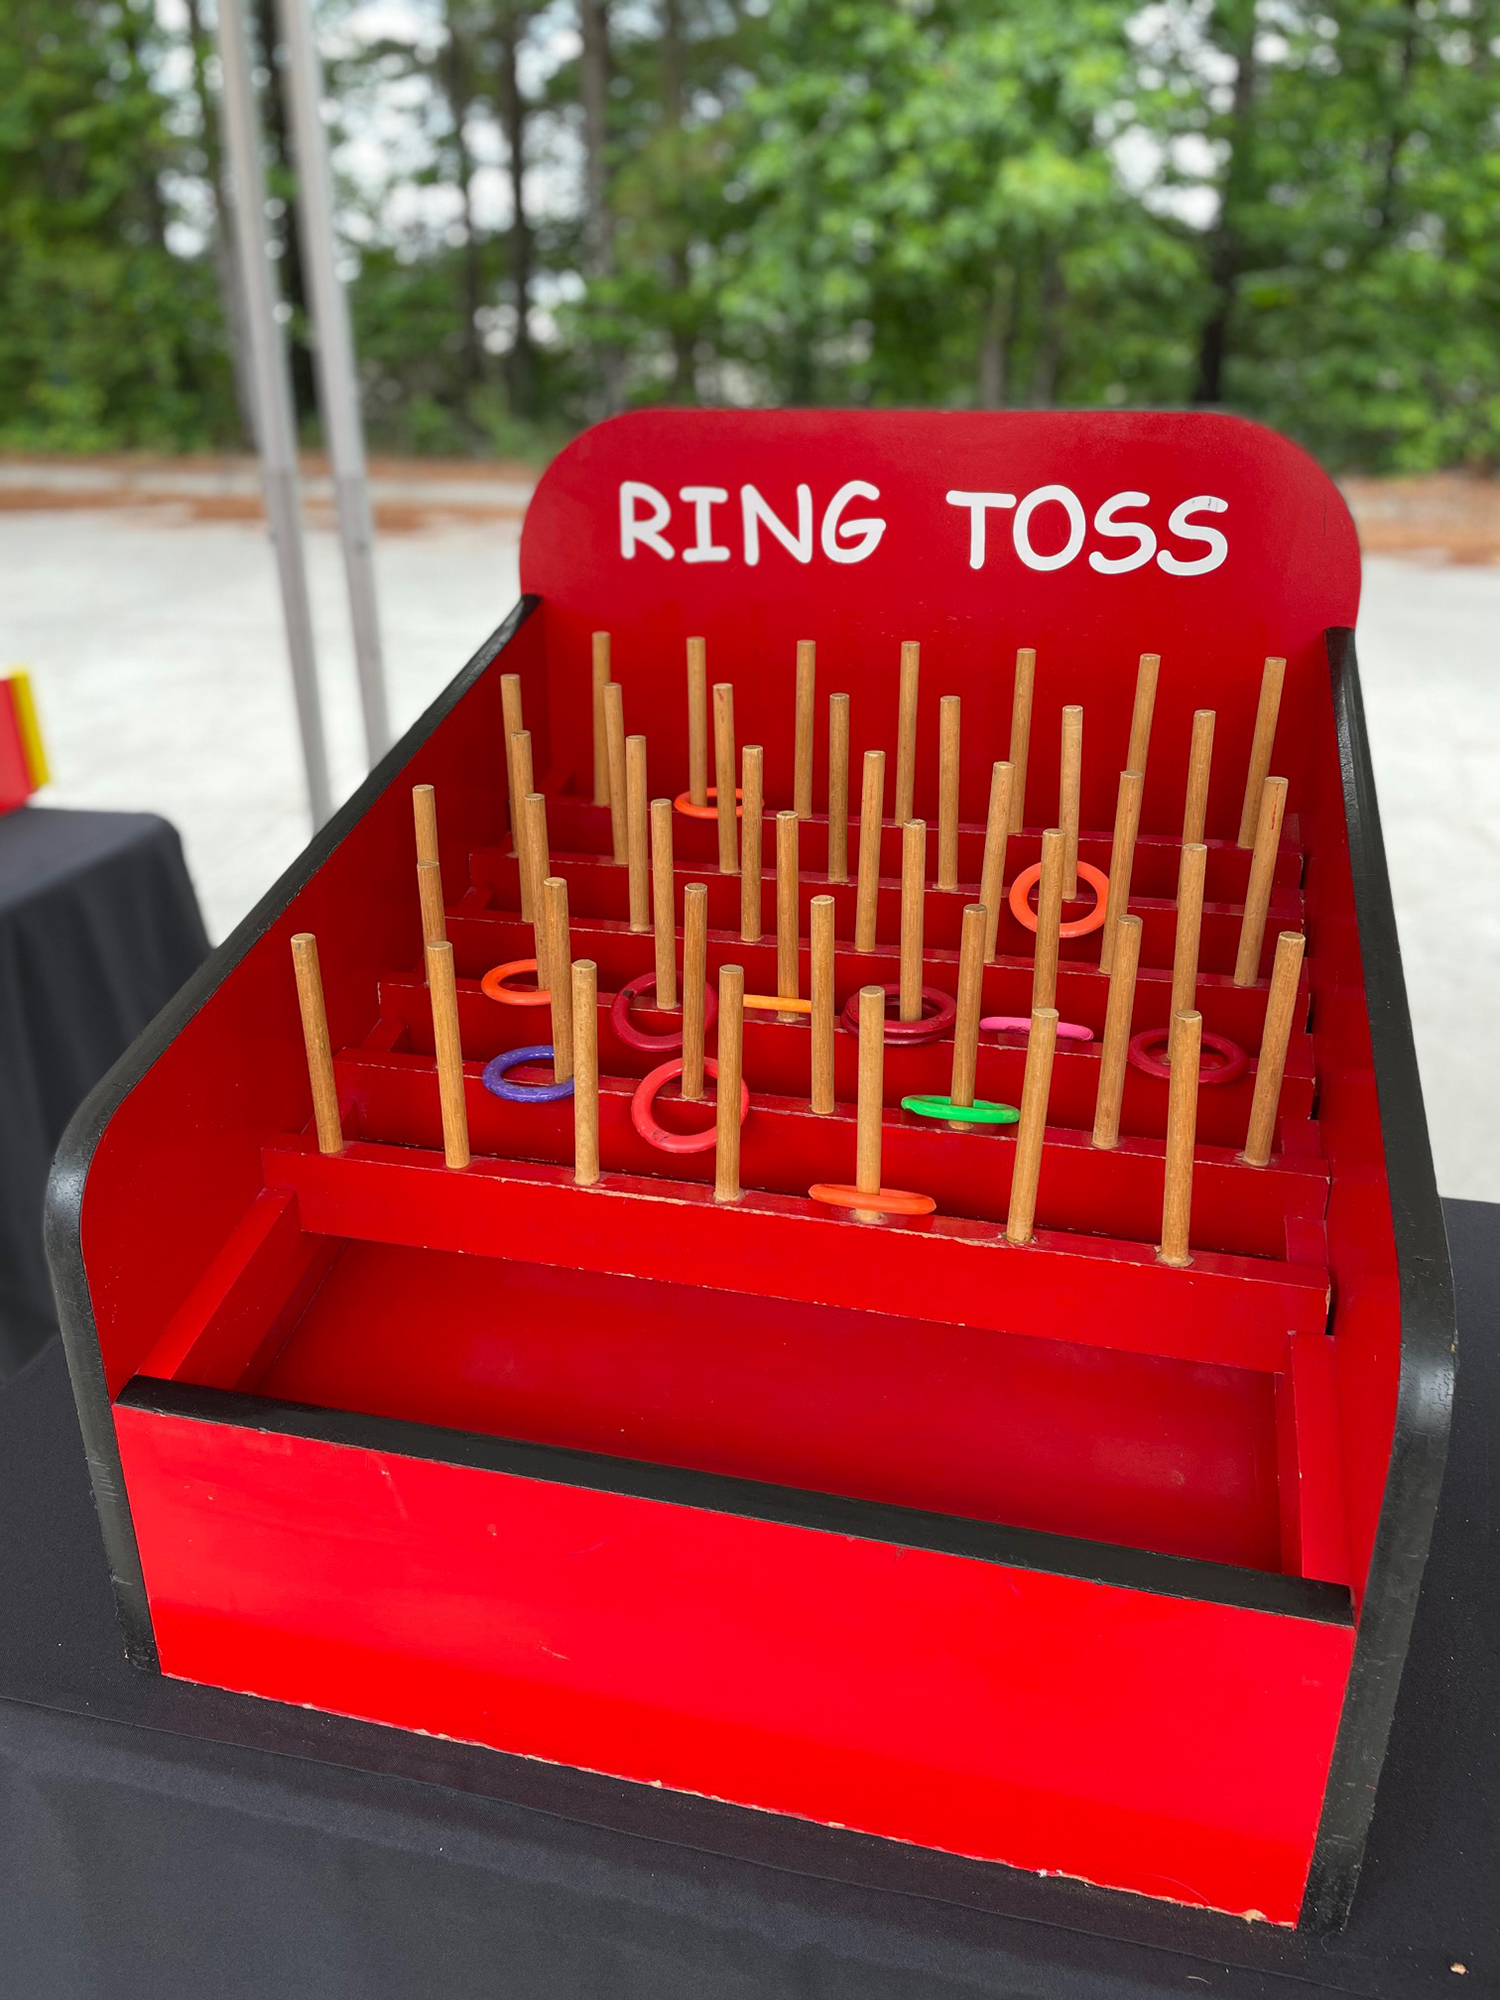 Skyline Events and Socials Carnval Games Ring Toss